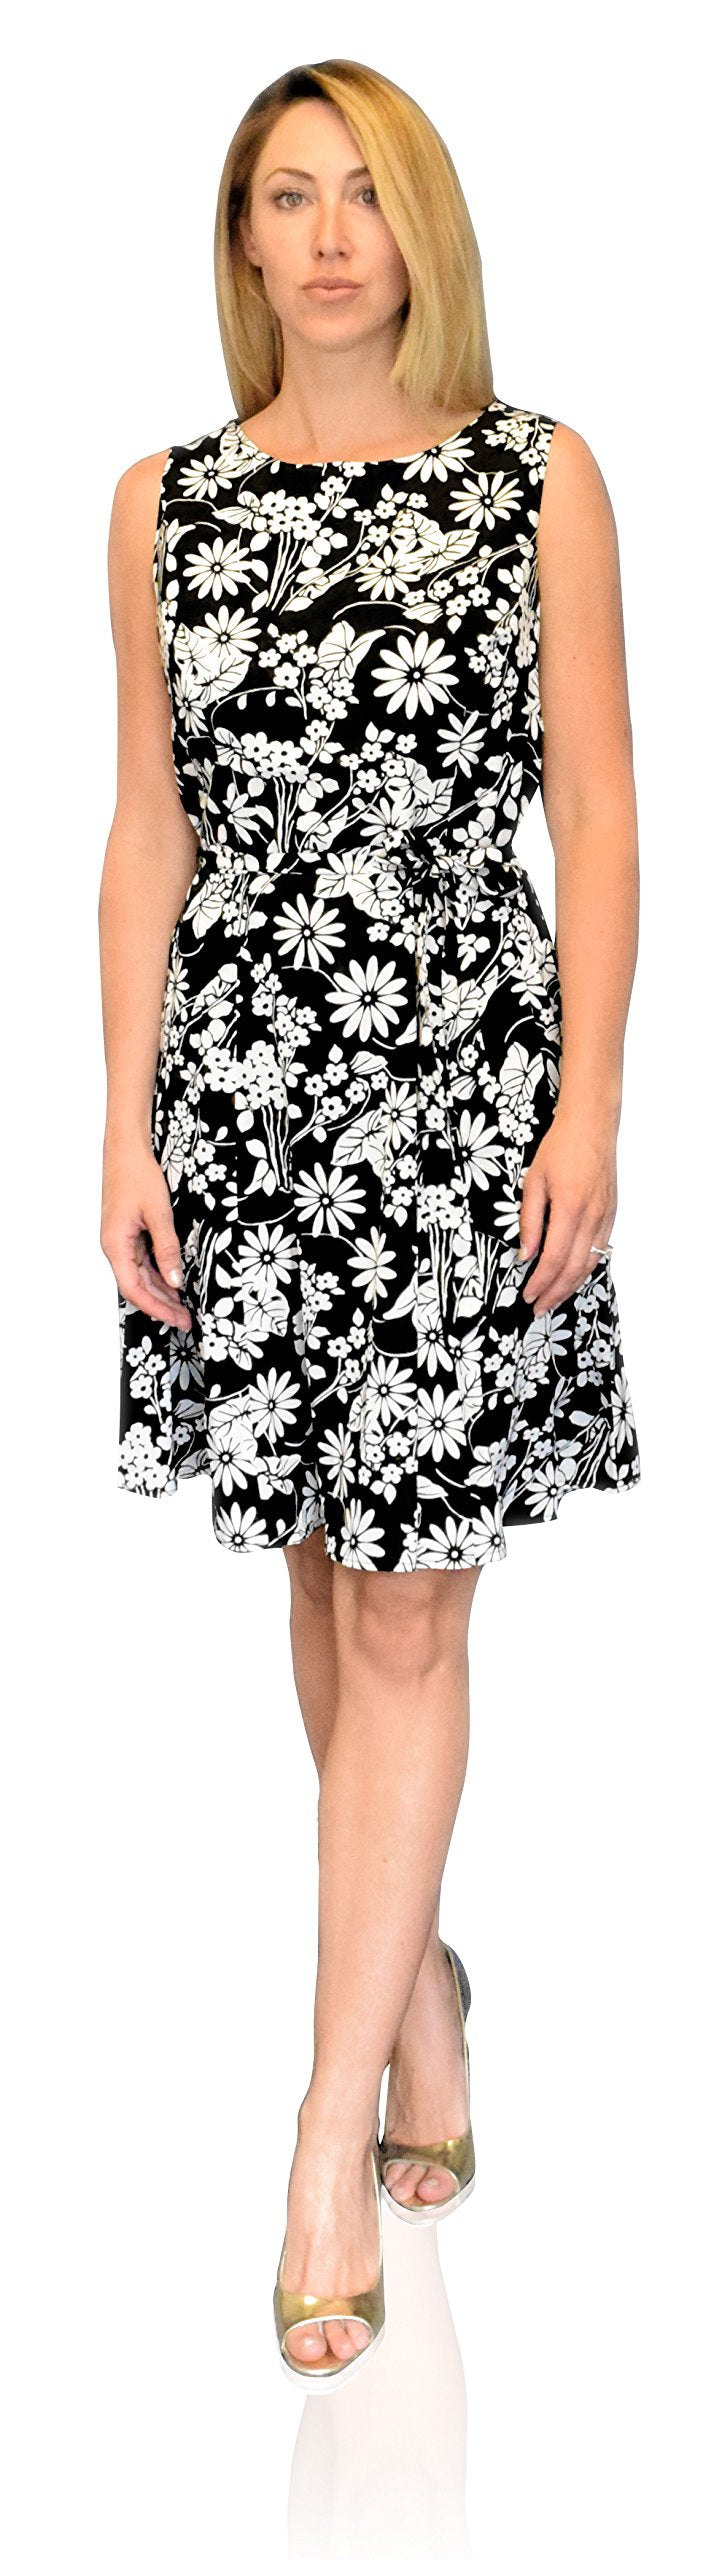 Silky Vintage Retro A Line Sleeveless Work Casual Belted Dress (Medium, Floral Black White)